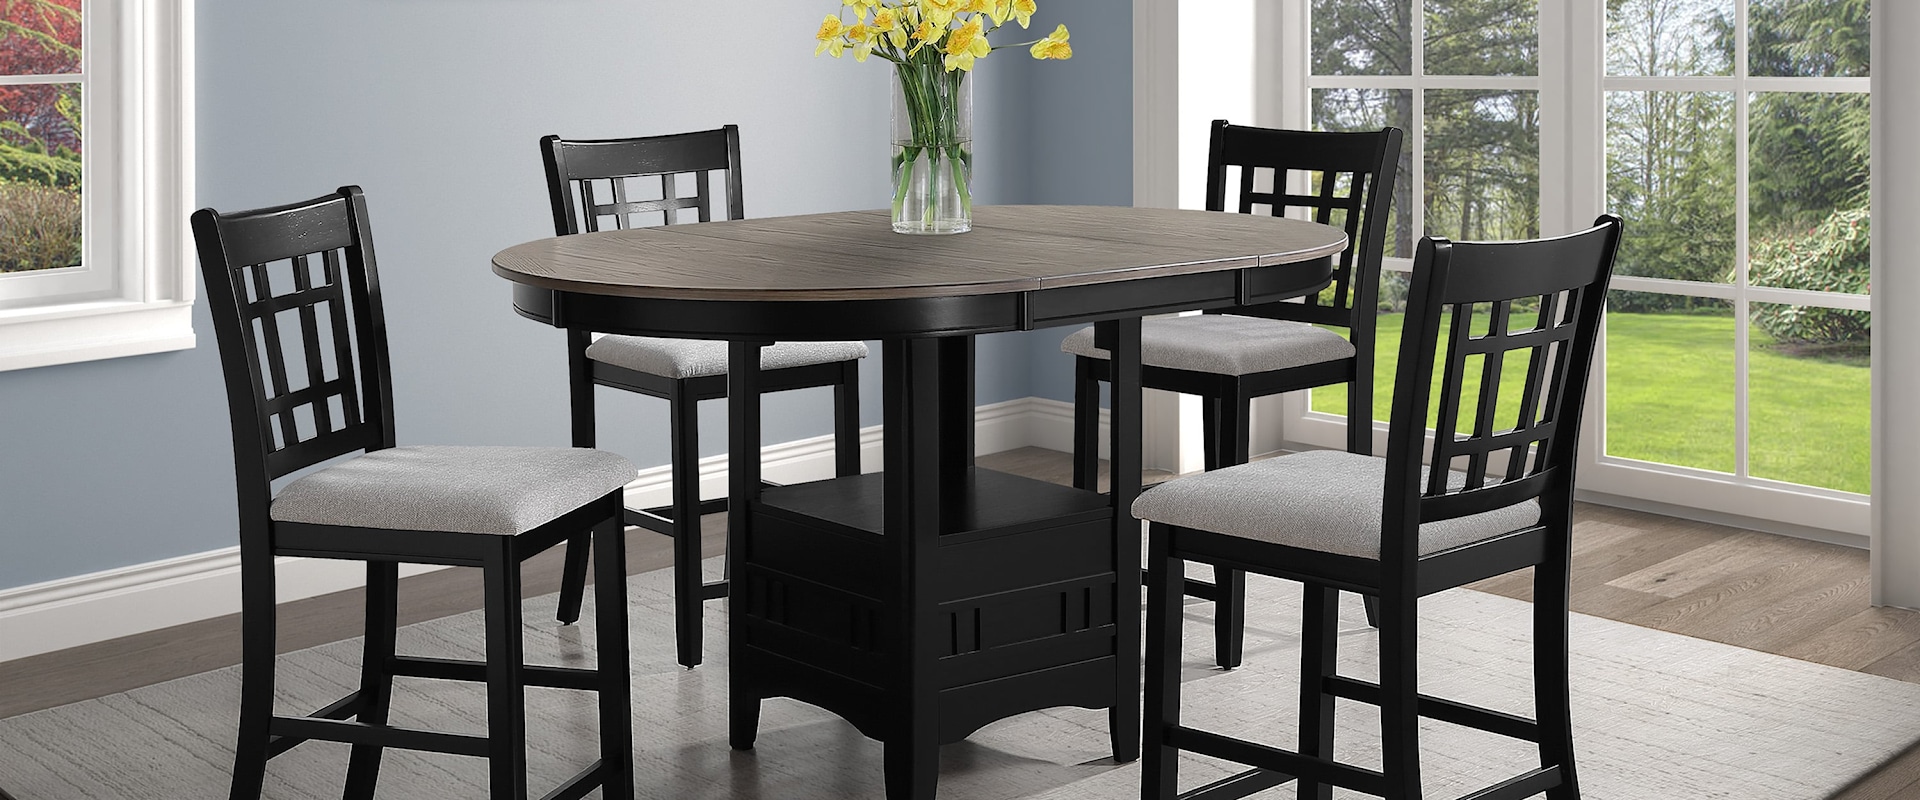 Hartwell Farmhouse 5-Piece Counter Height Dining Set